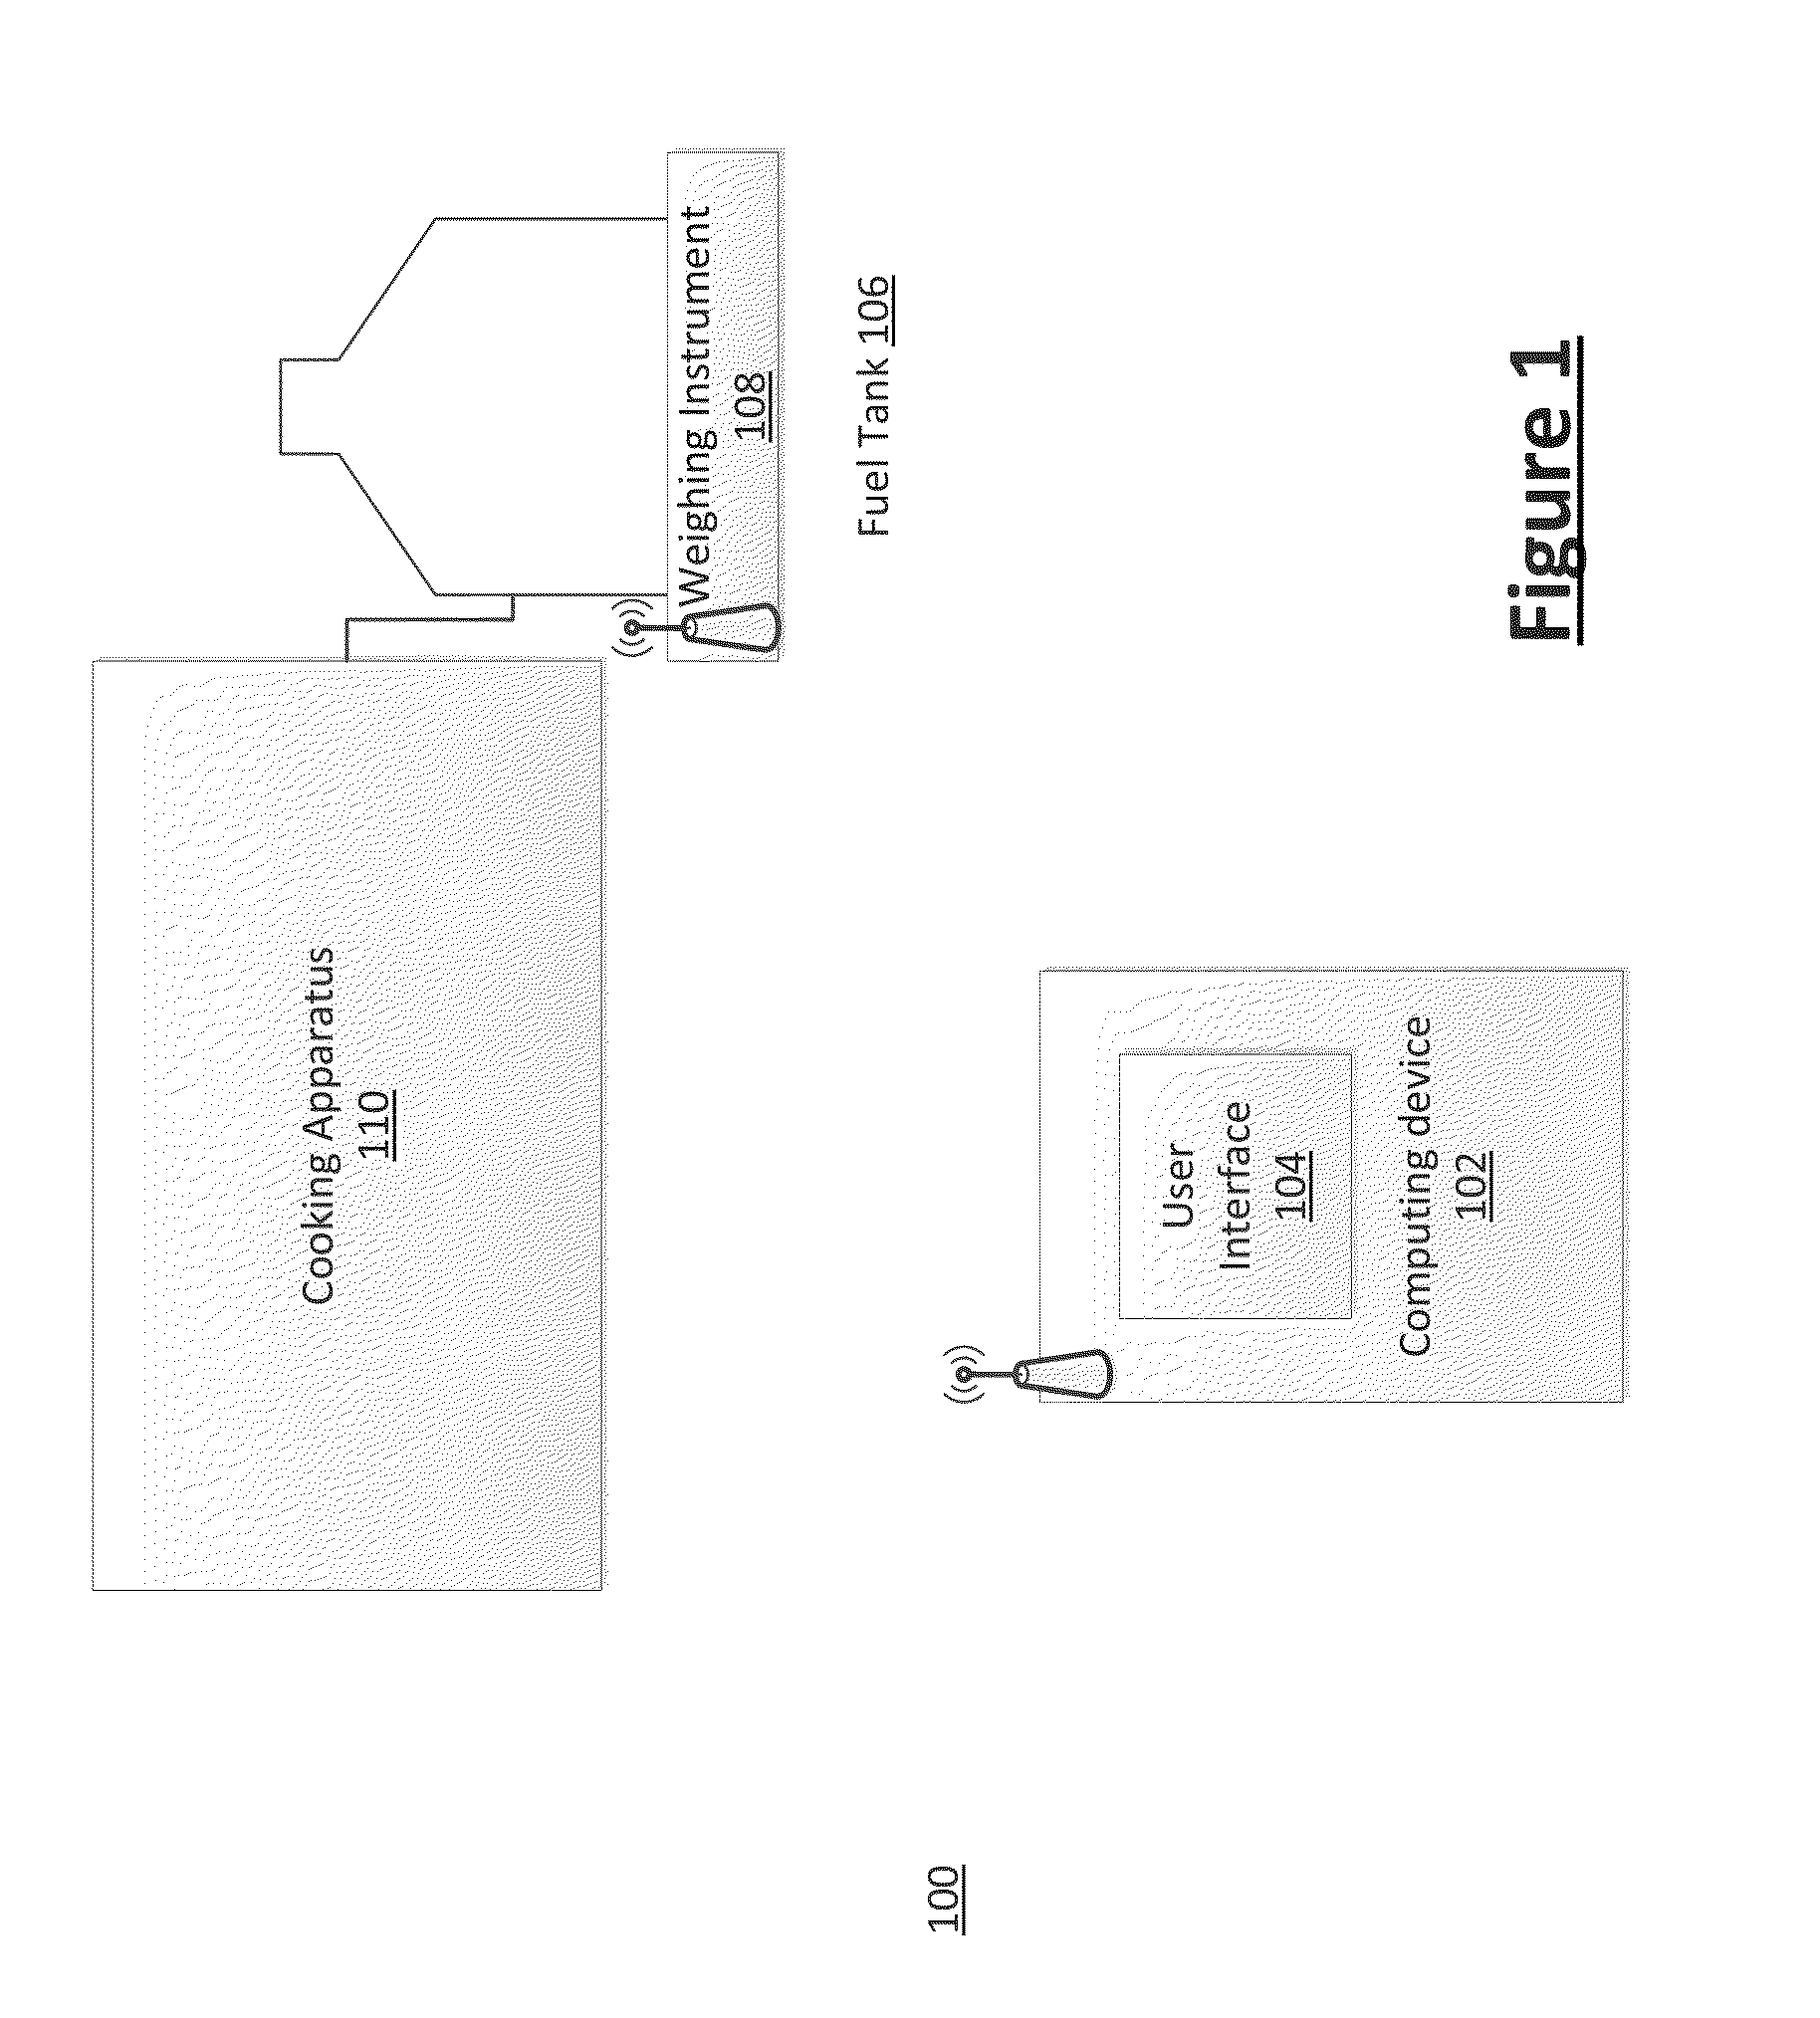 Systems, methods and devices for remote fuel level detection